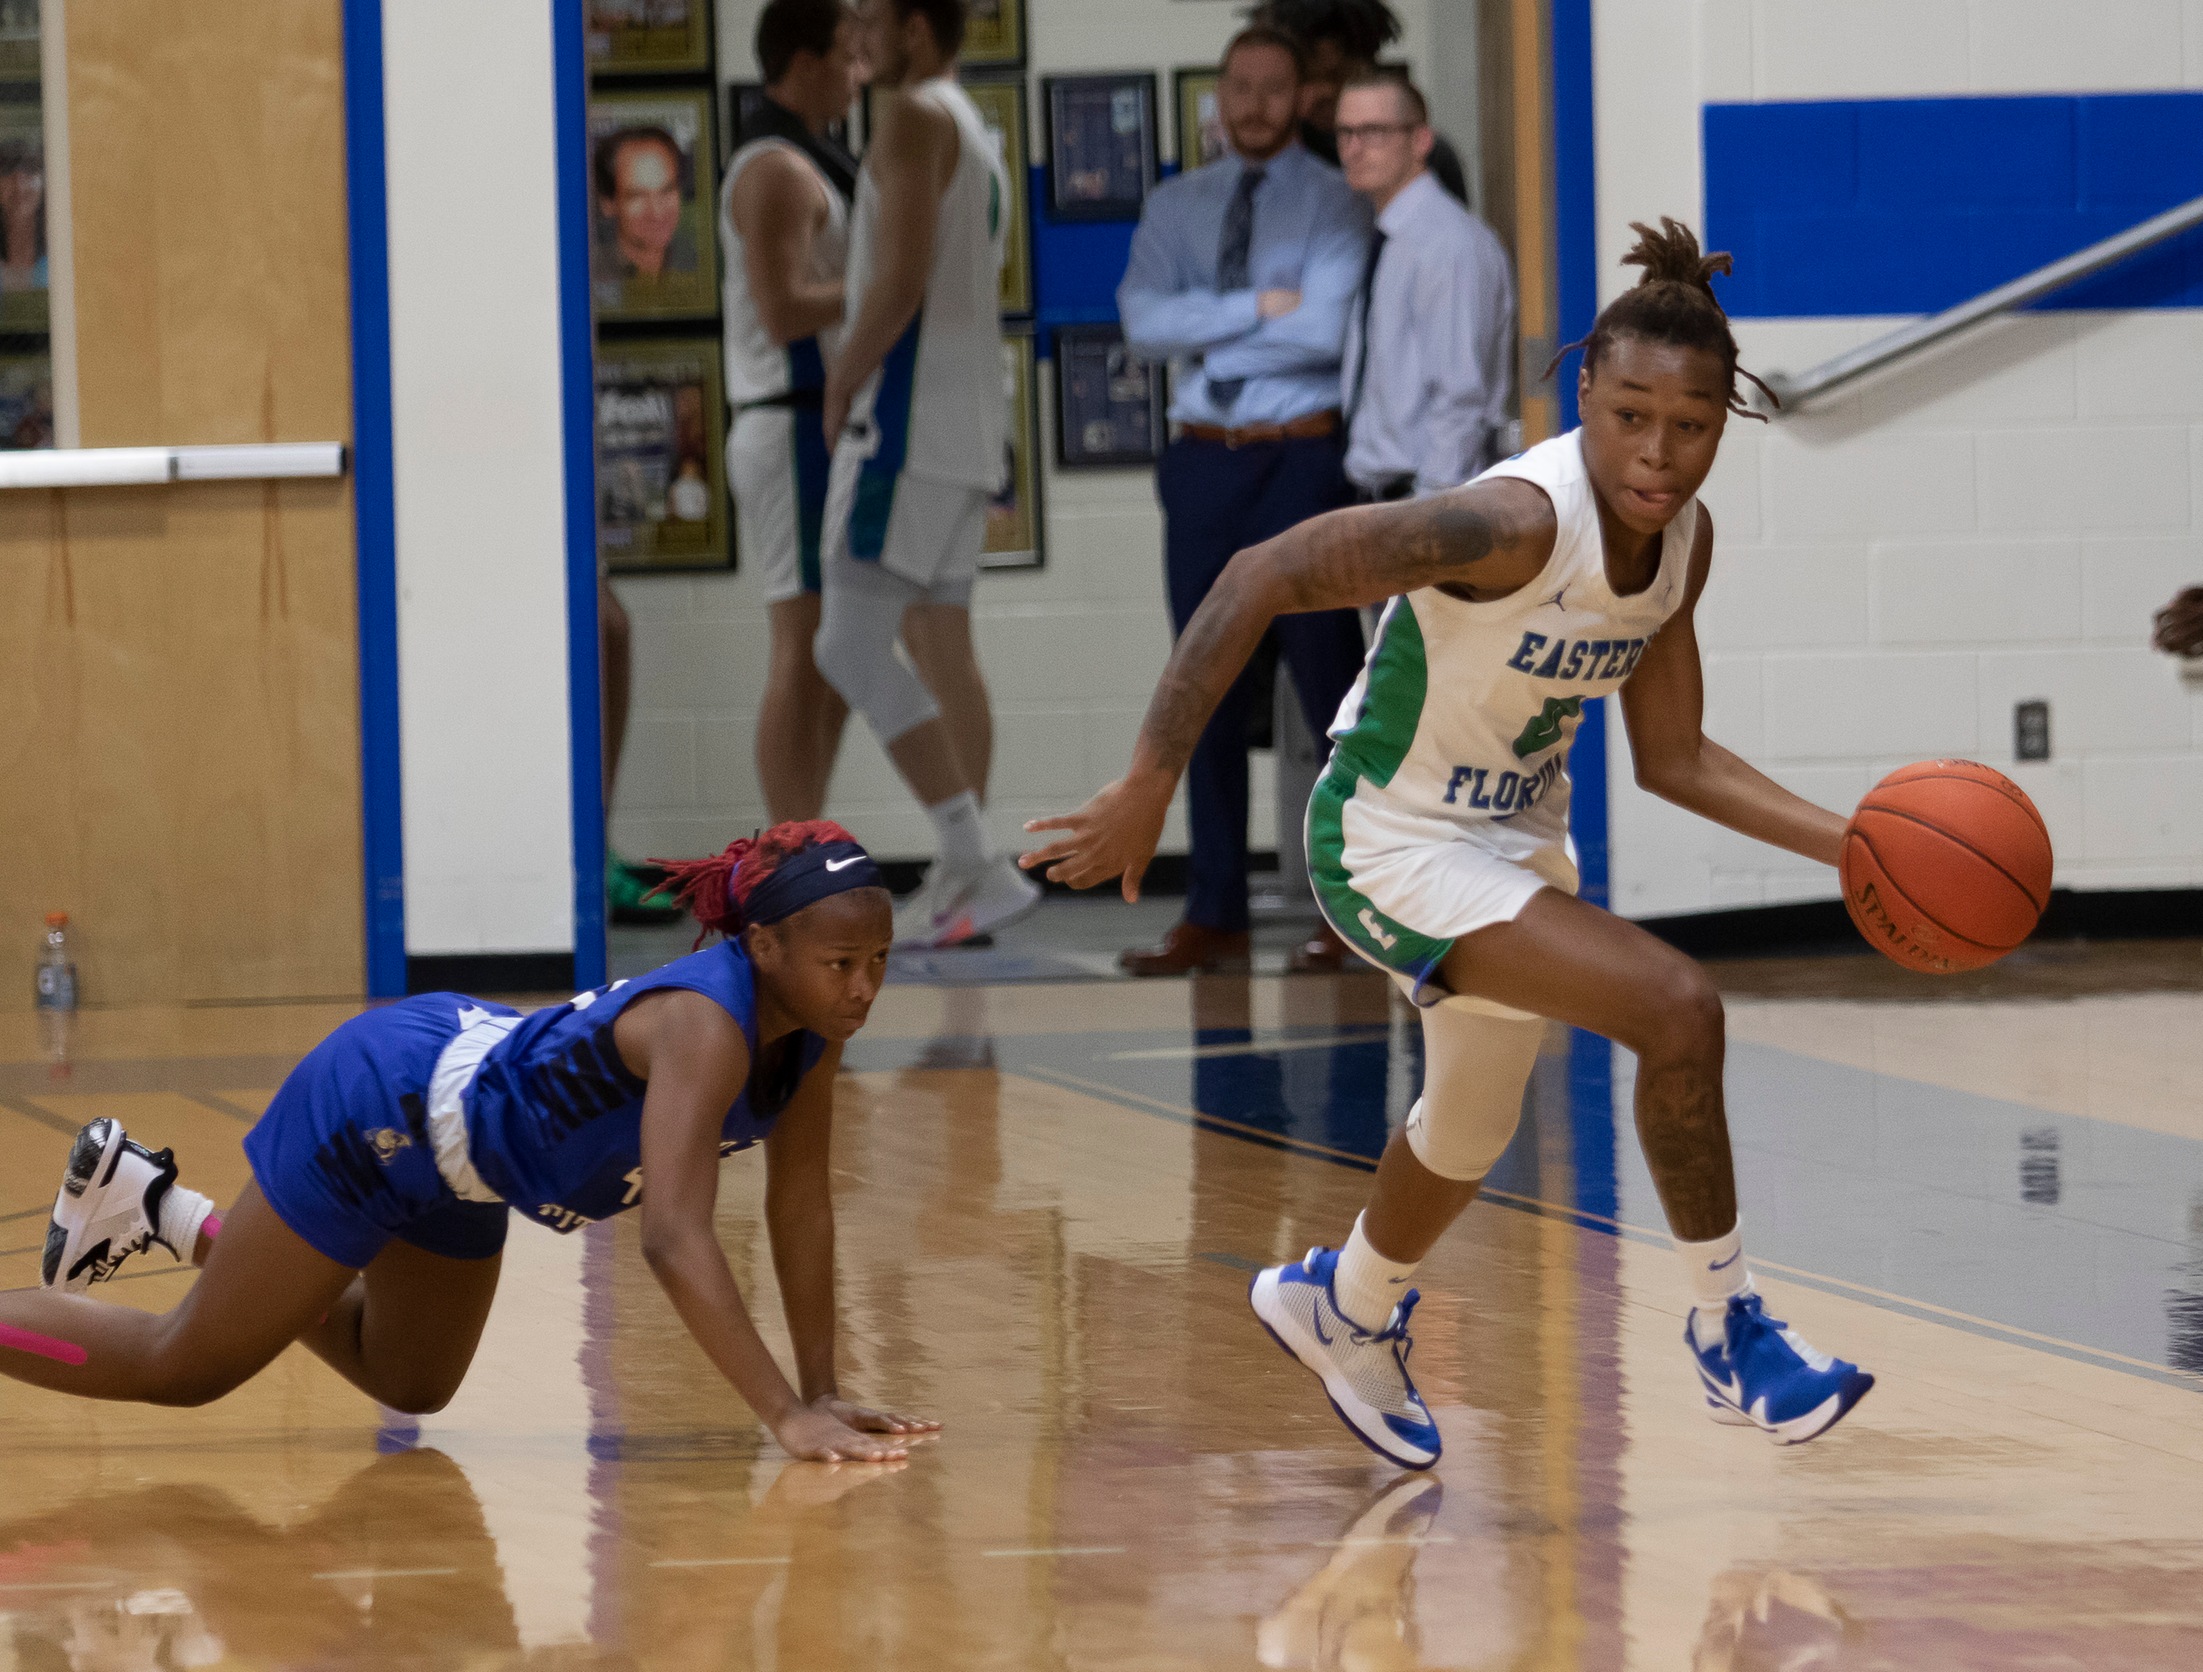 Women's basketball team faces Indian River State College in state tournament semifinal